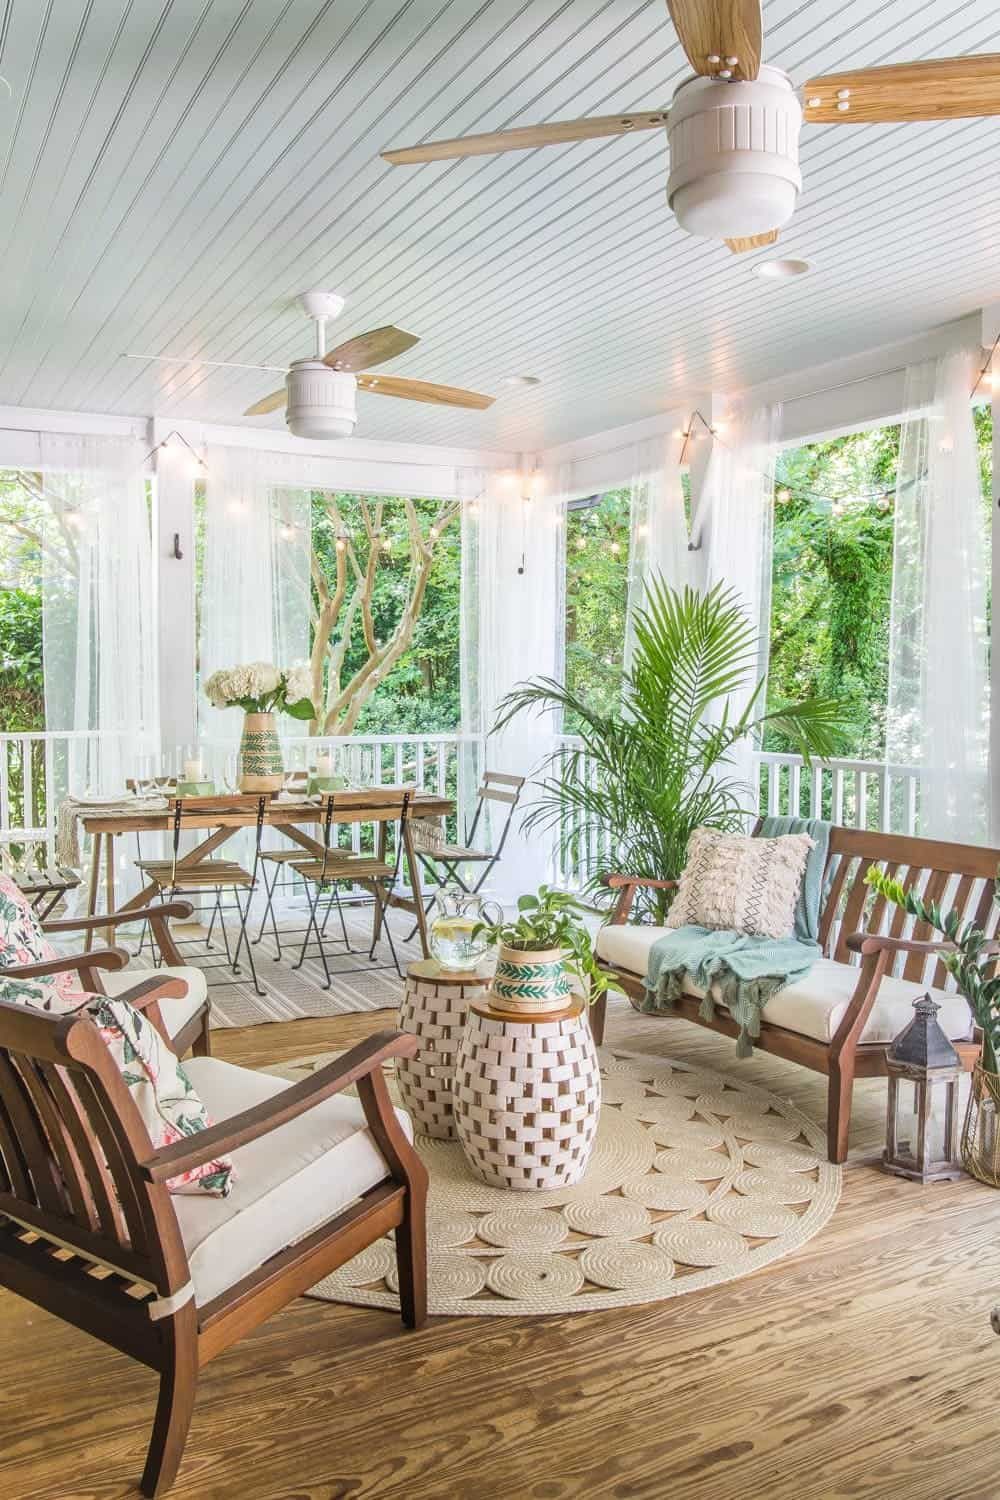 Creative Design Concepts for Your Screened-In Porch